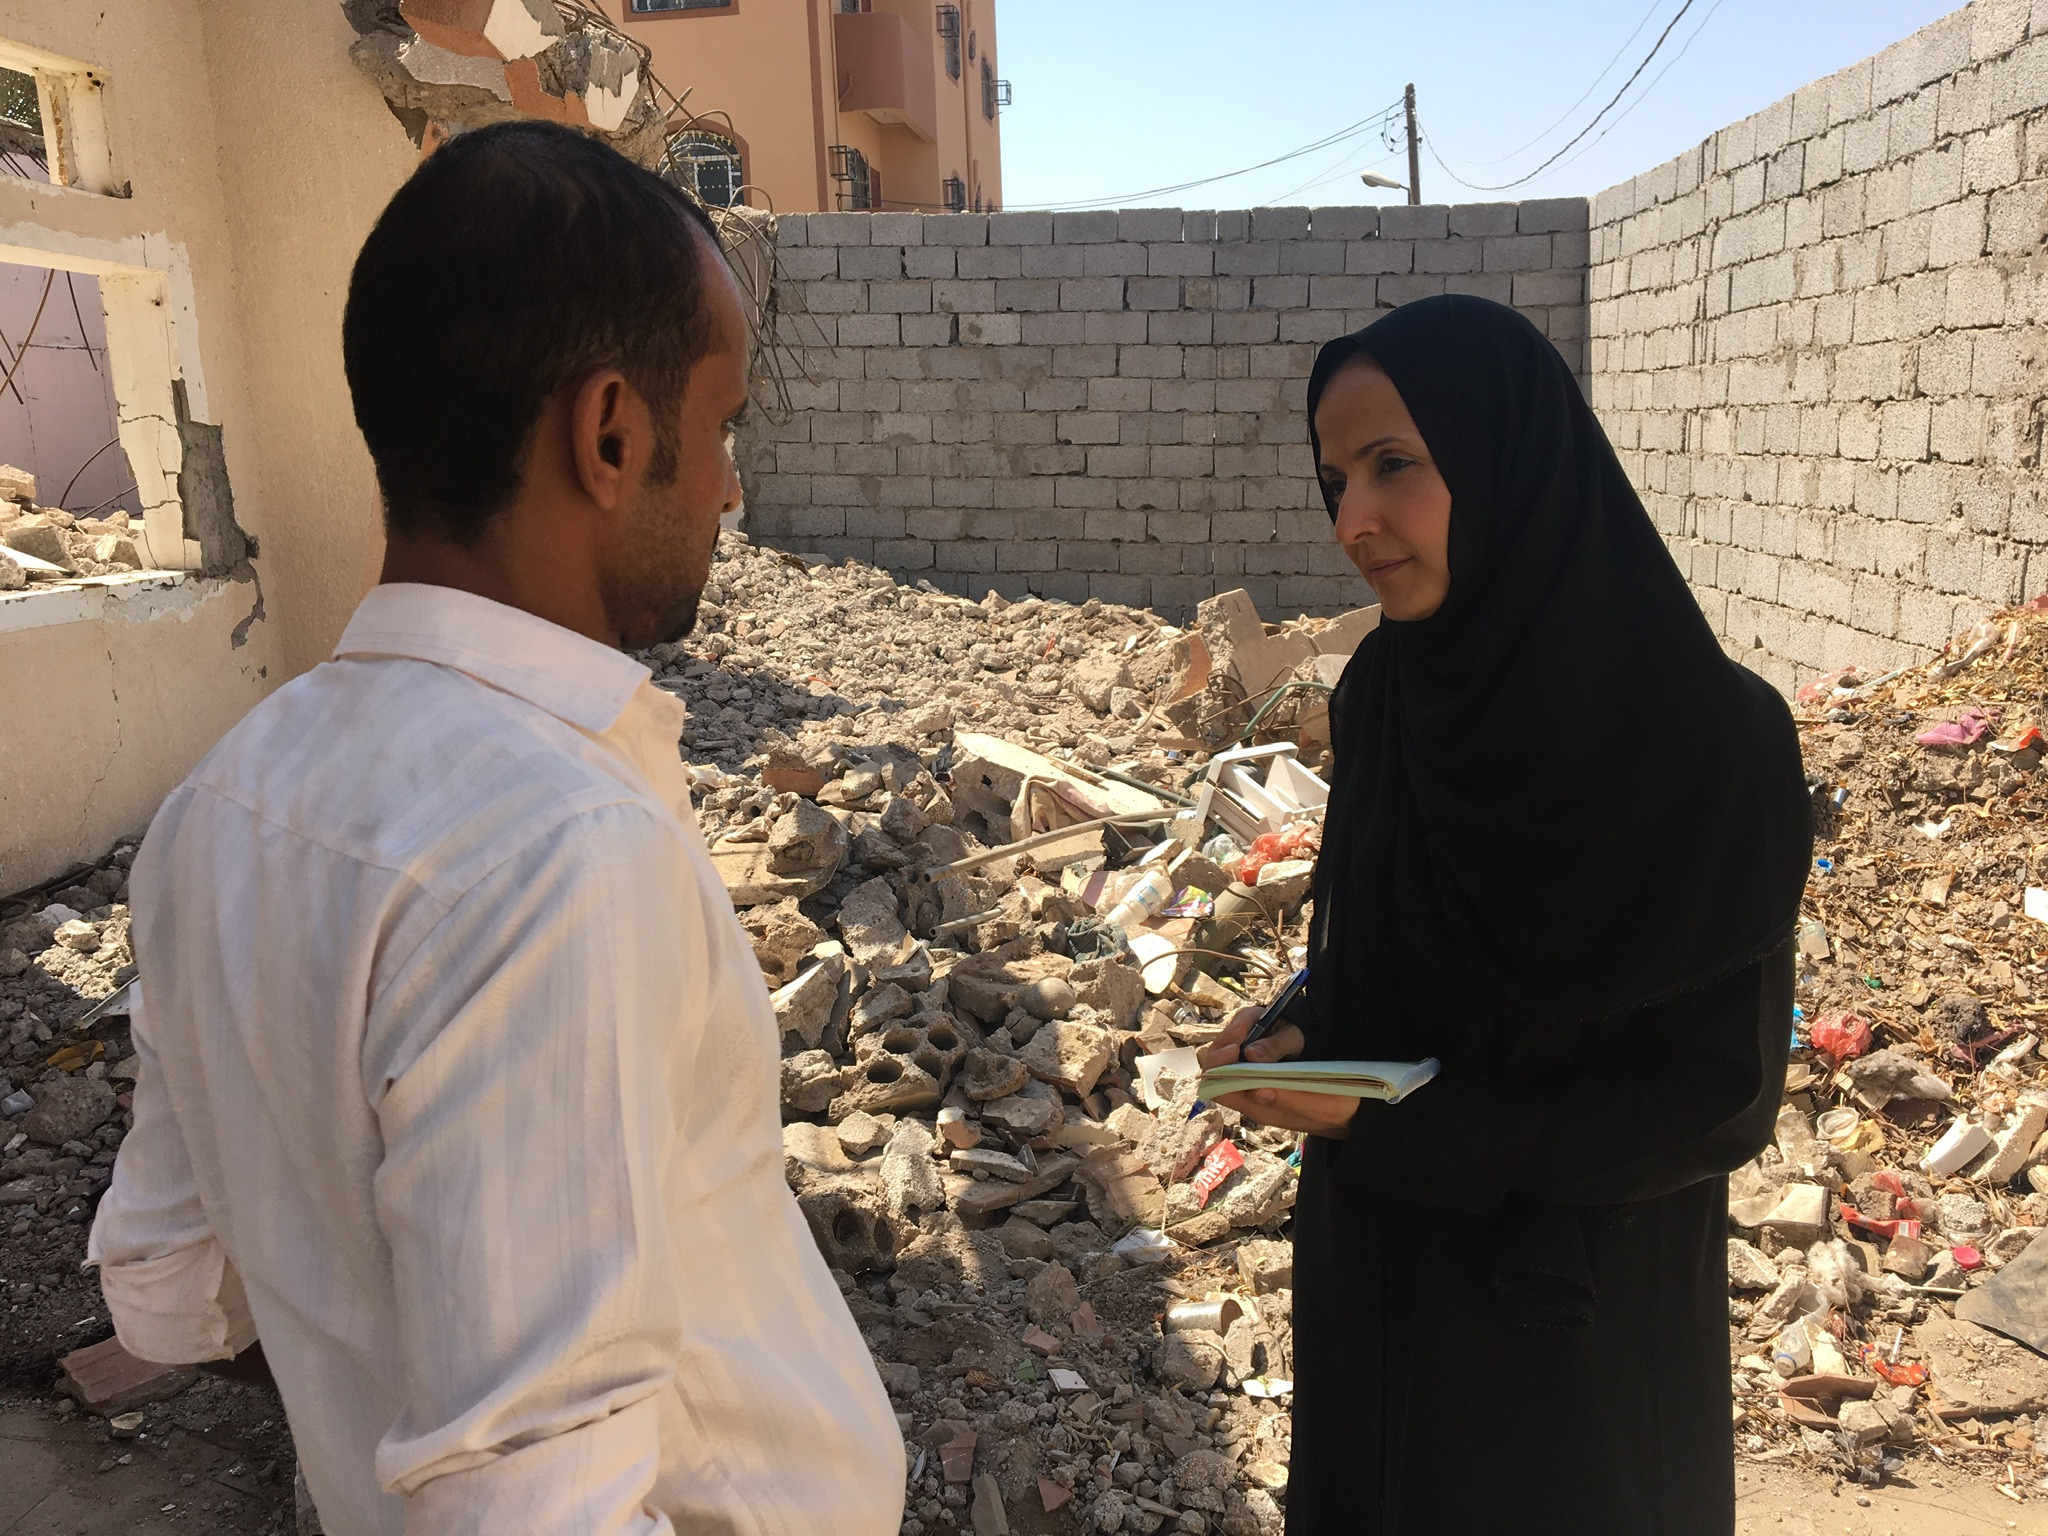 Rawya Rageh in Aden, Yemen, 2018, interviewing a man who was displaced due to the fighting in Hodeidah.